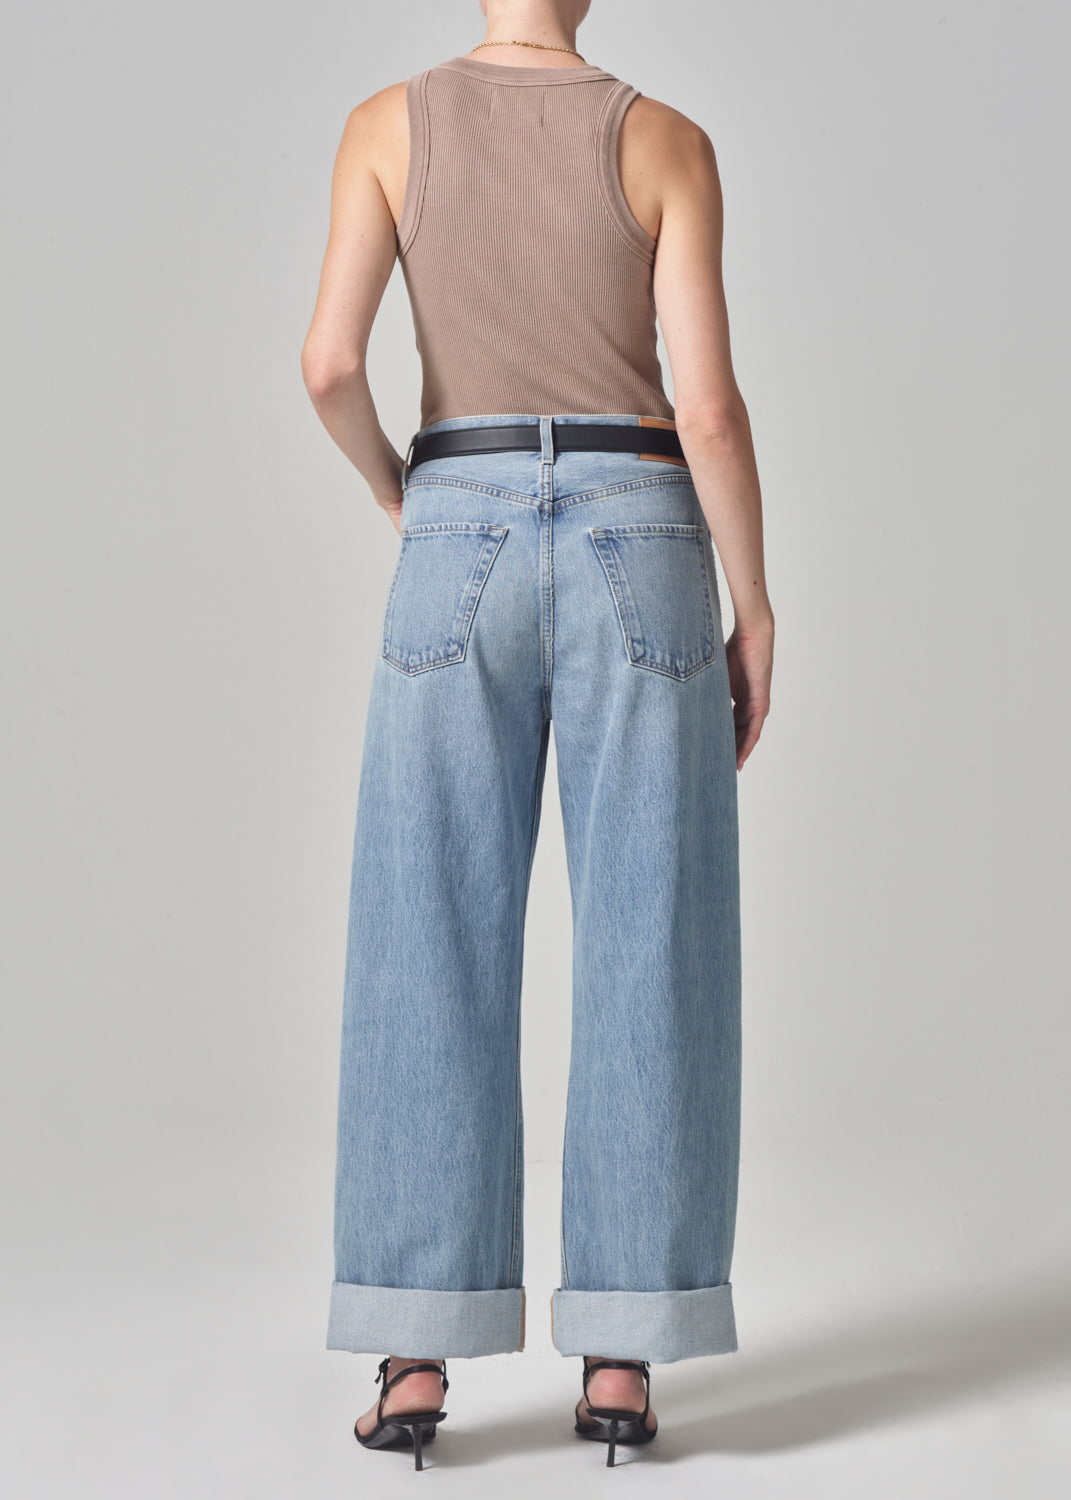 Ayla Baggy Cuffed Crop in Skylights – Citizens of Humanity